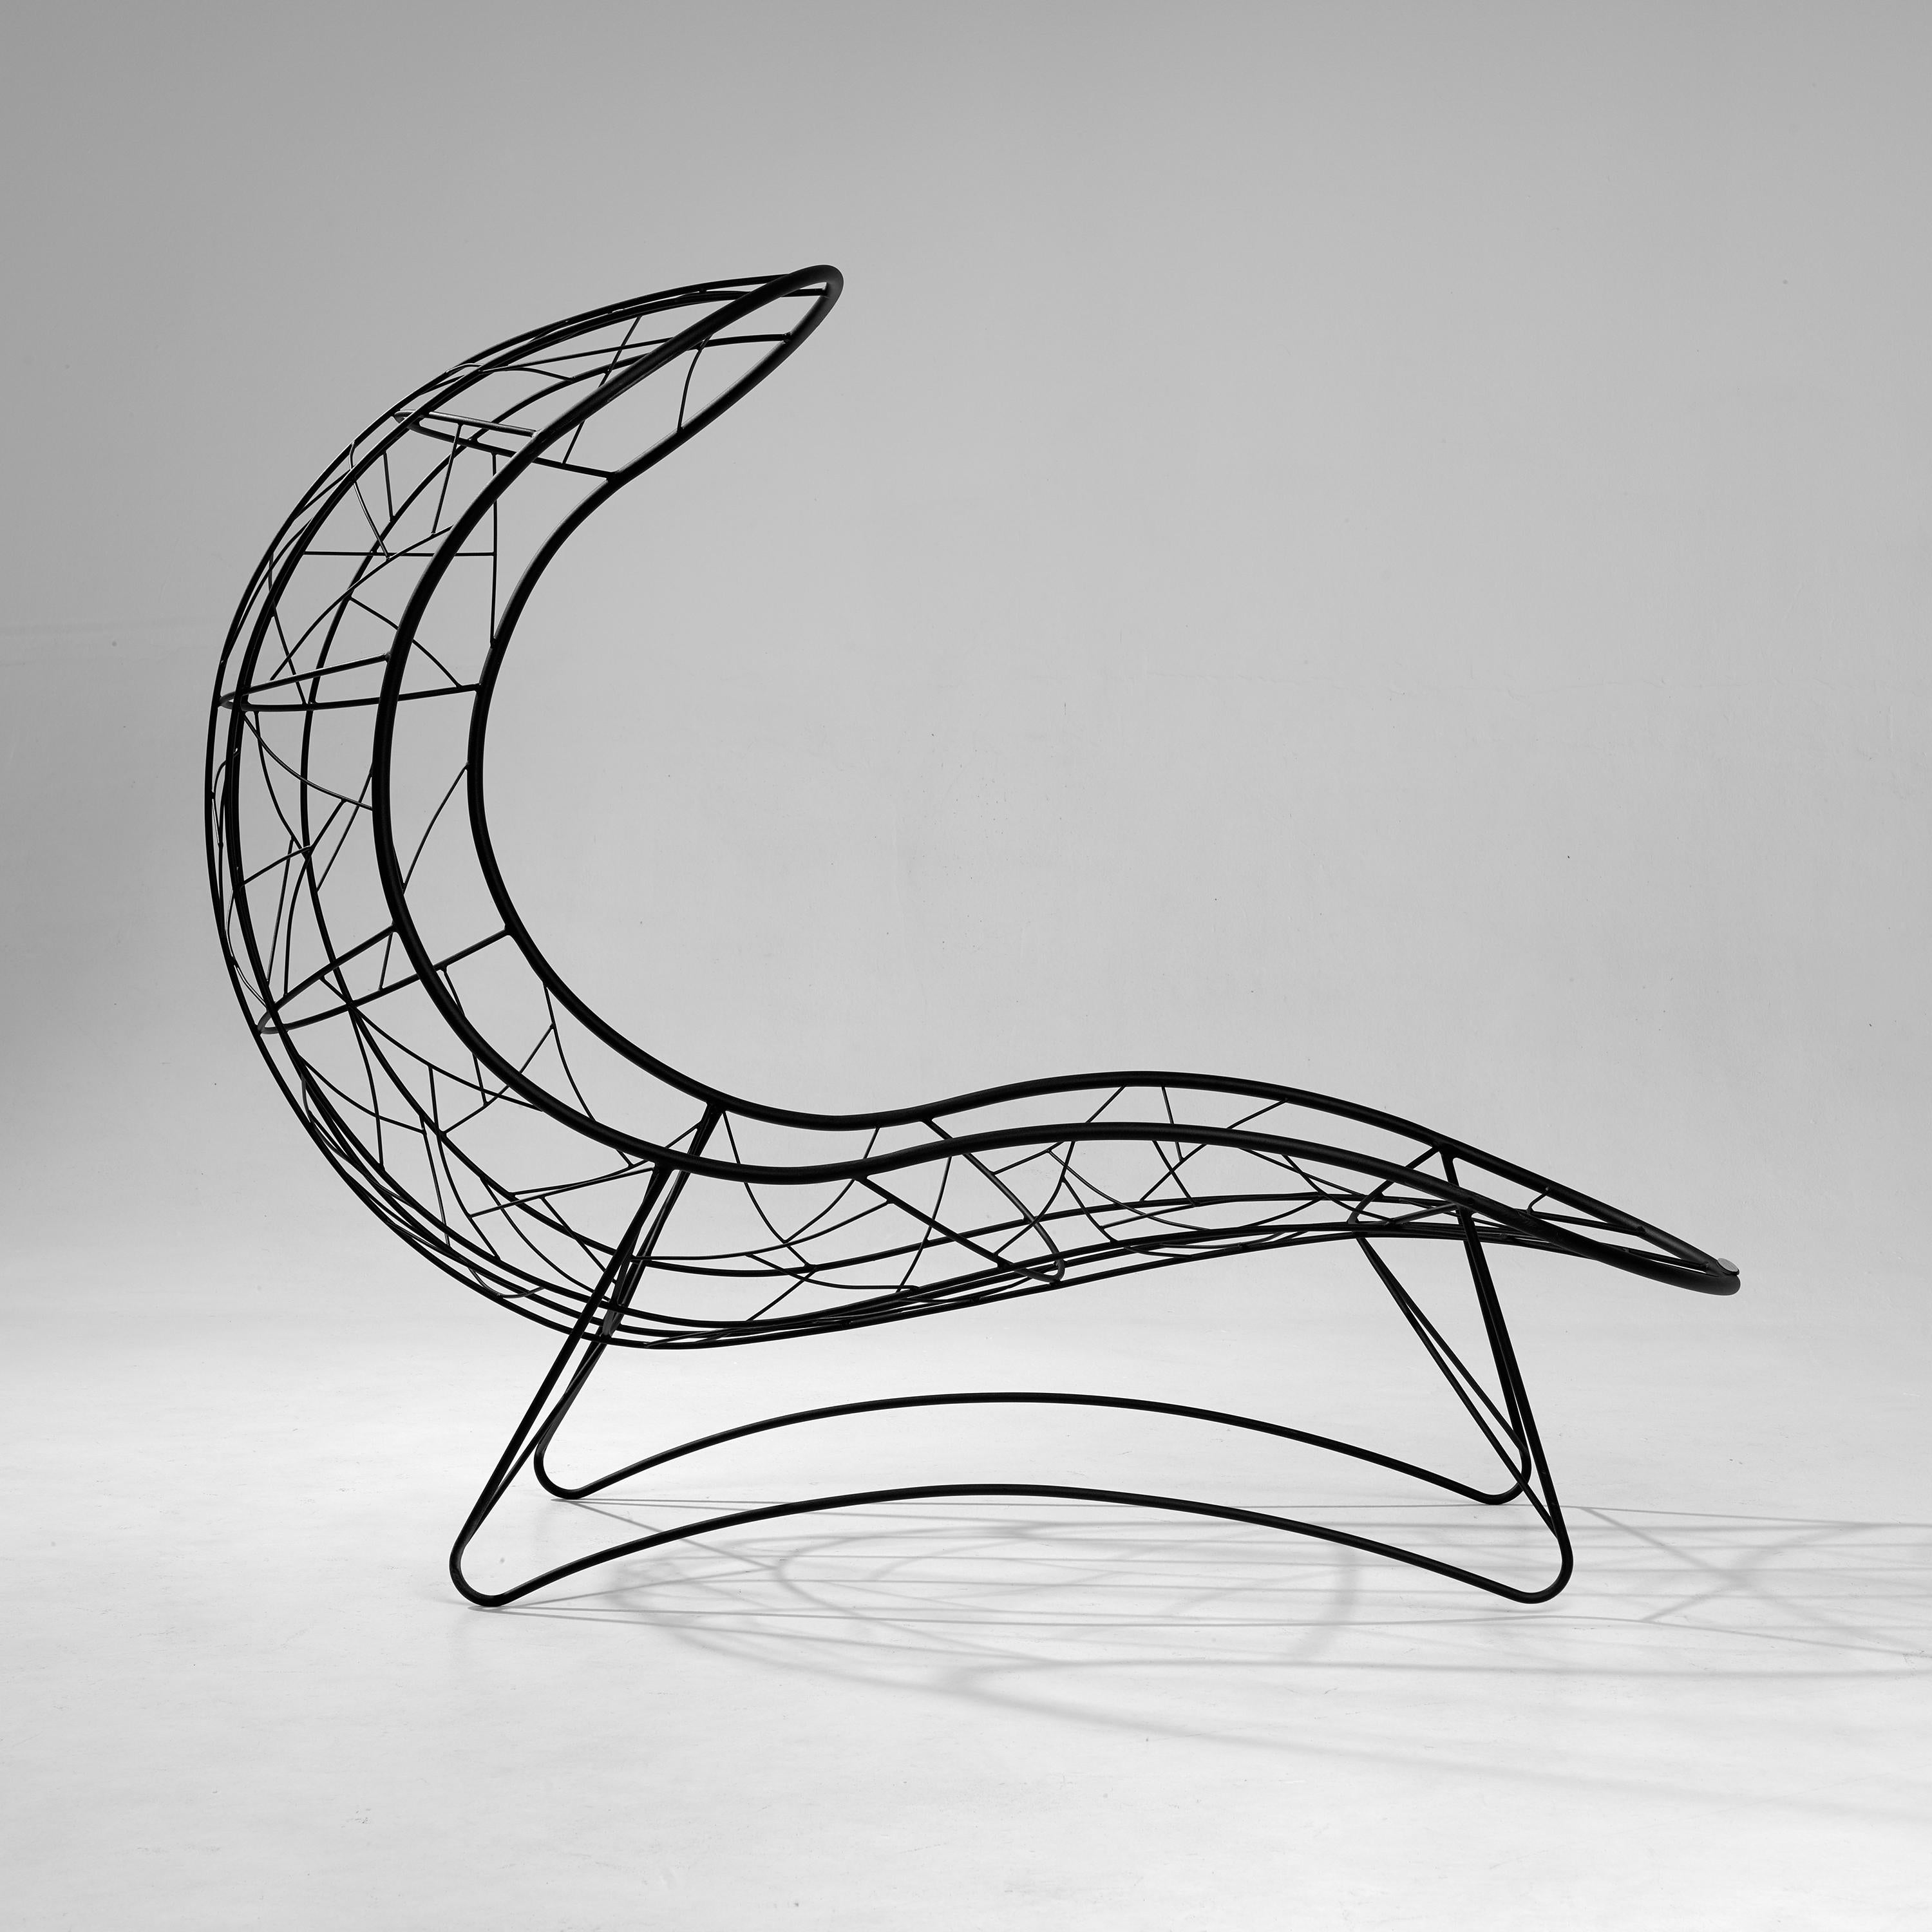 The Recliner lounger has elegantly curved lines & is sculptural and dynamic with a considered balance point.

Fluid & organic, it lends itself for use as a functional art piece with panoramic views of its surroundings. The nature inspired pattern